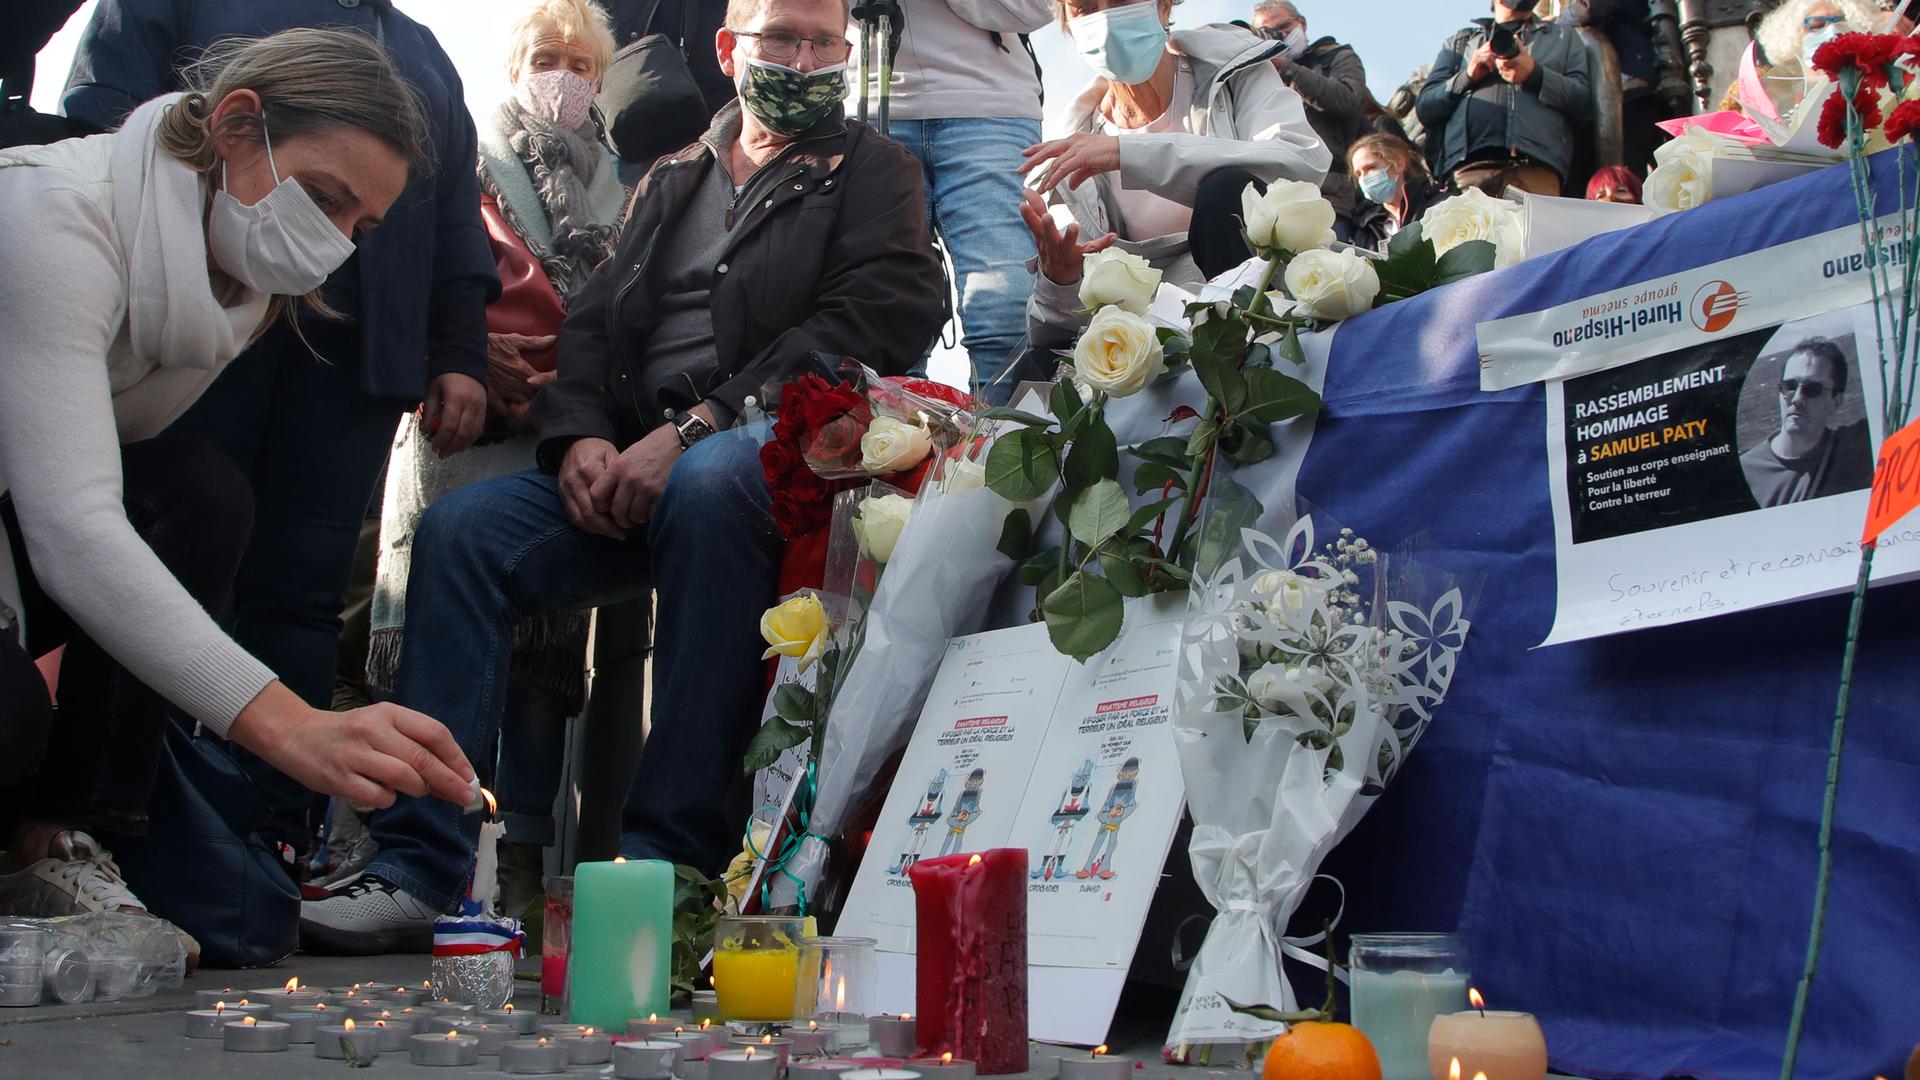 A large group of people are shown near a make shift memorial with candles and flowers for a teacher who was killed in France.